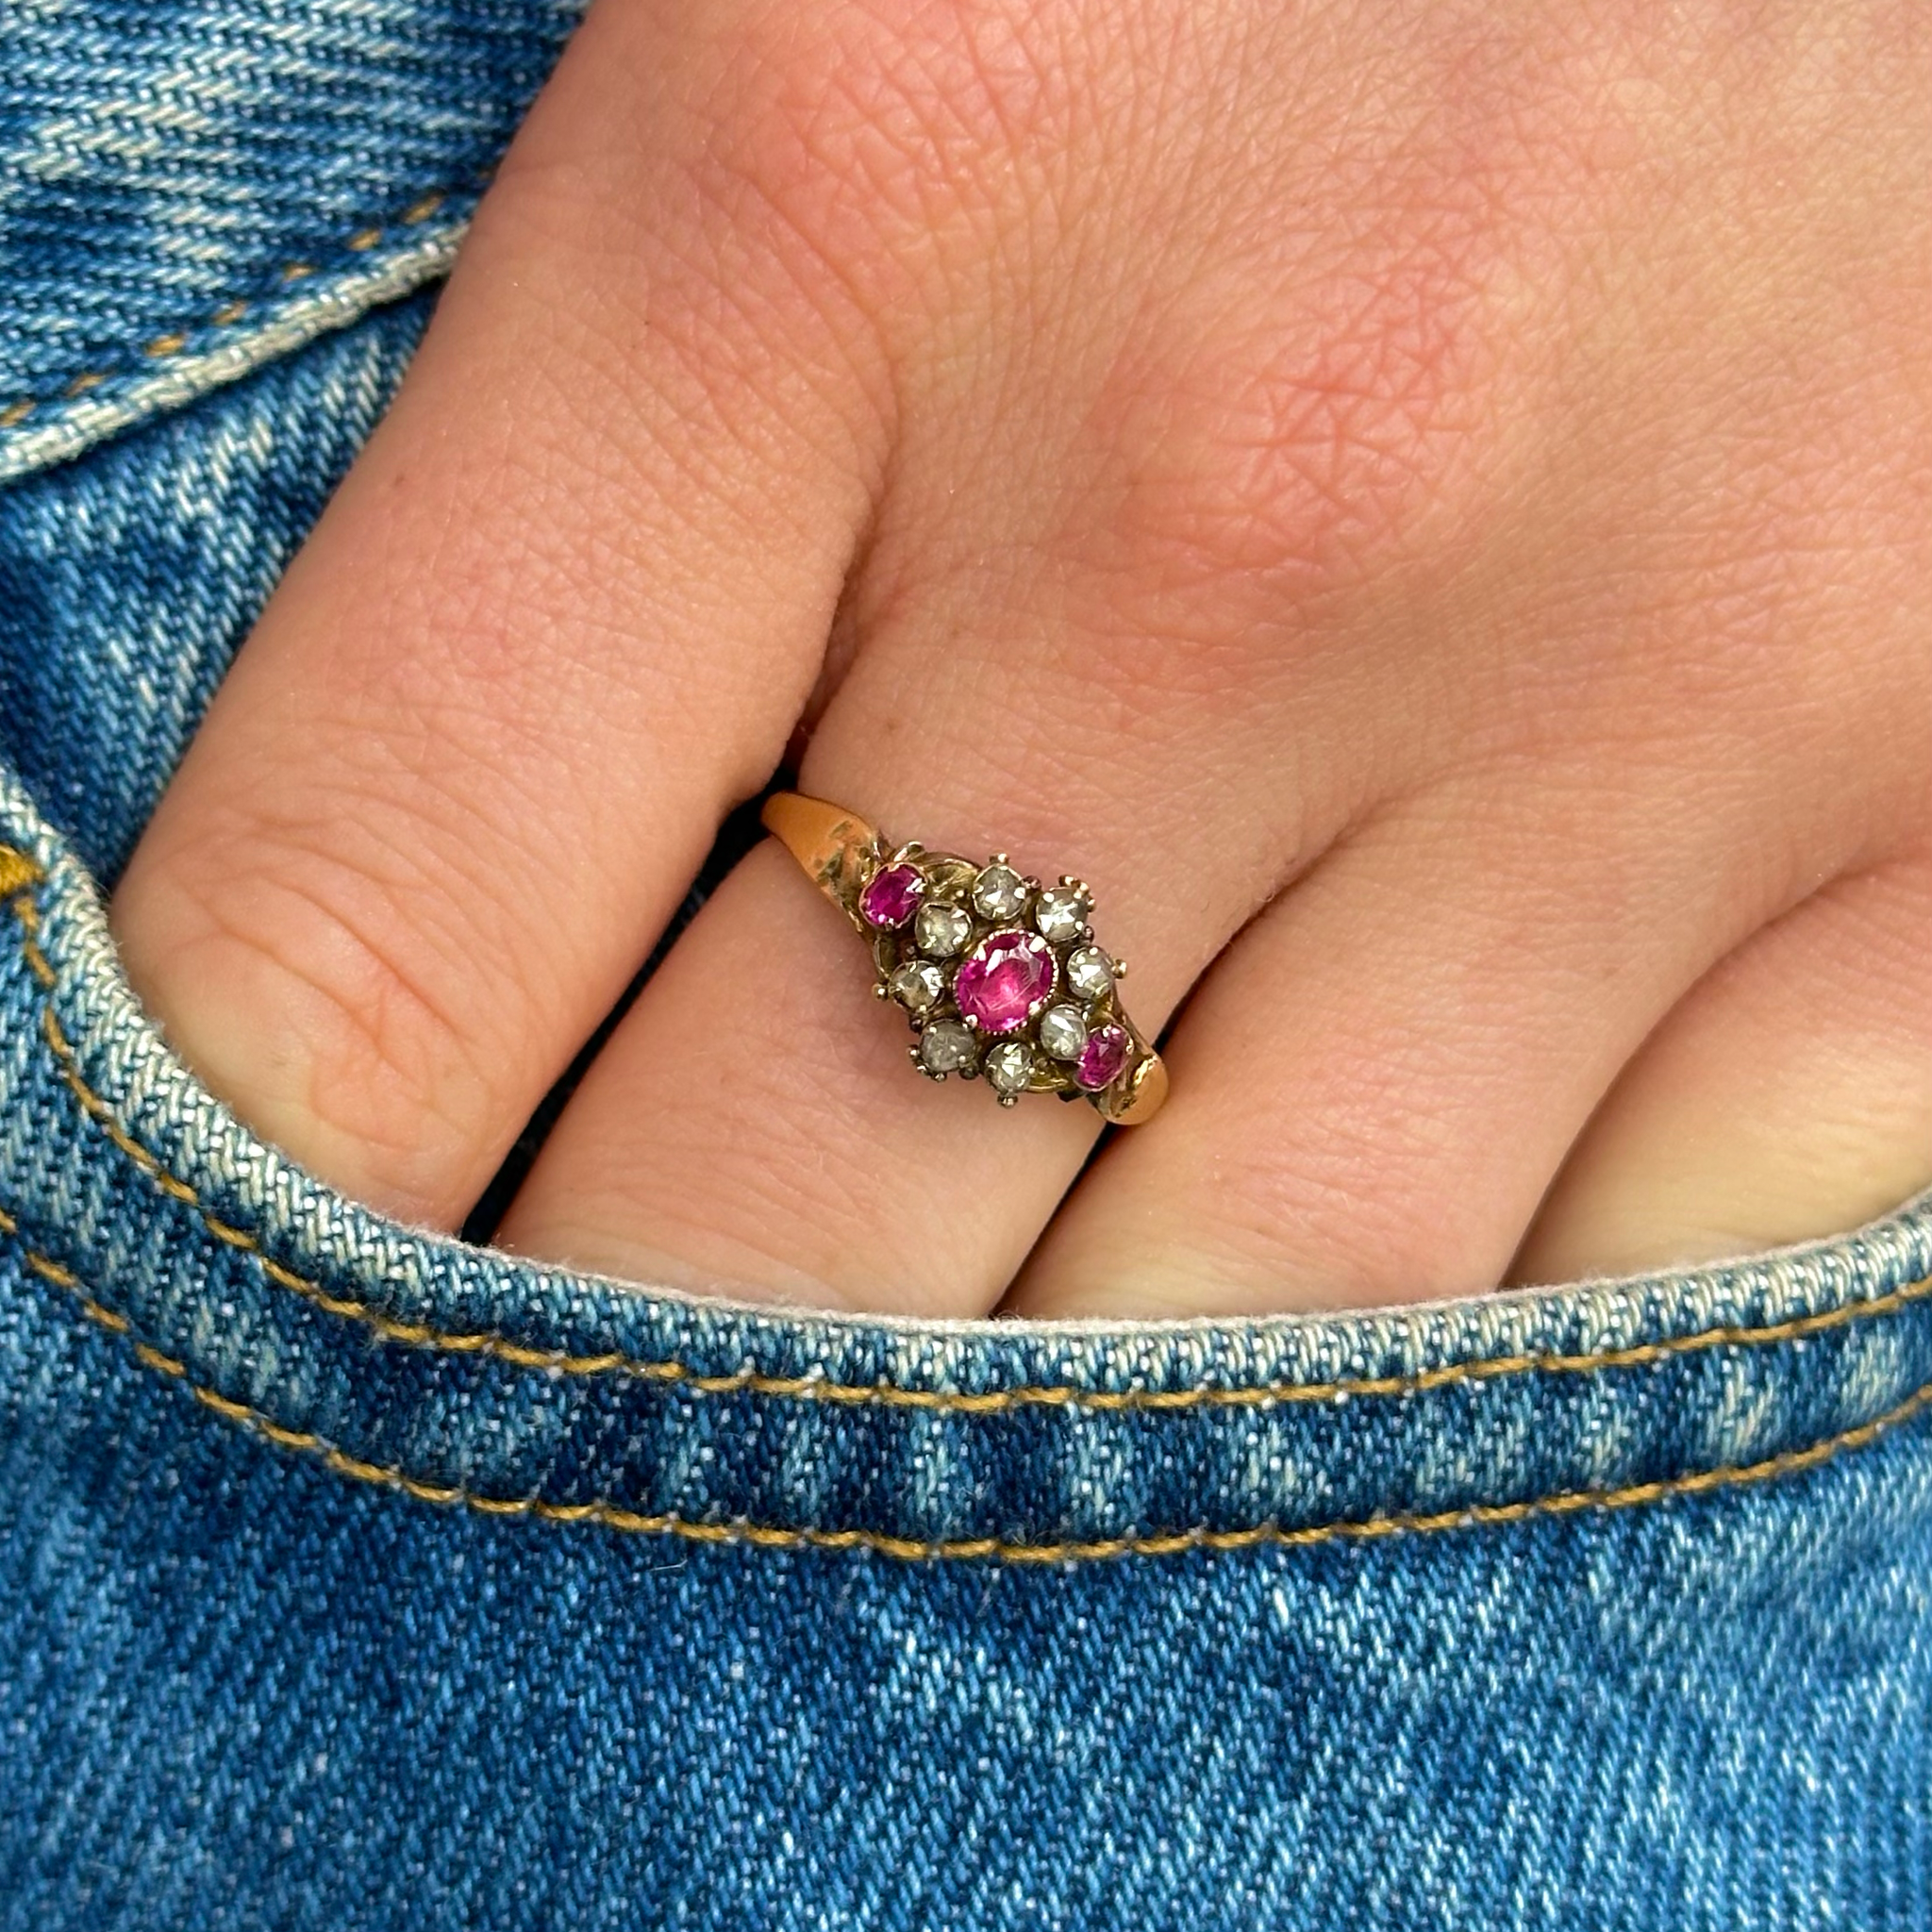 Antique, Edwardian Ruby and Diamond Cluster Ring, worn on hand in pocket of jeans